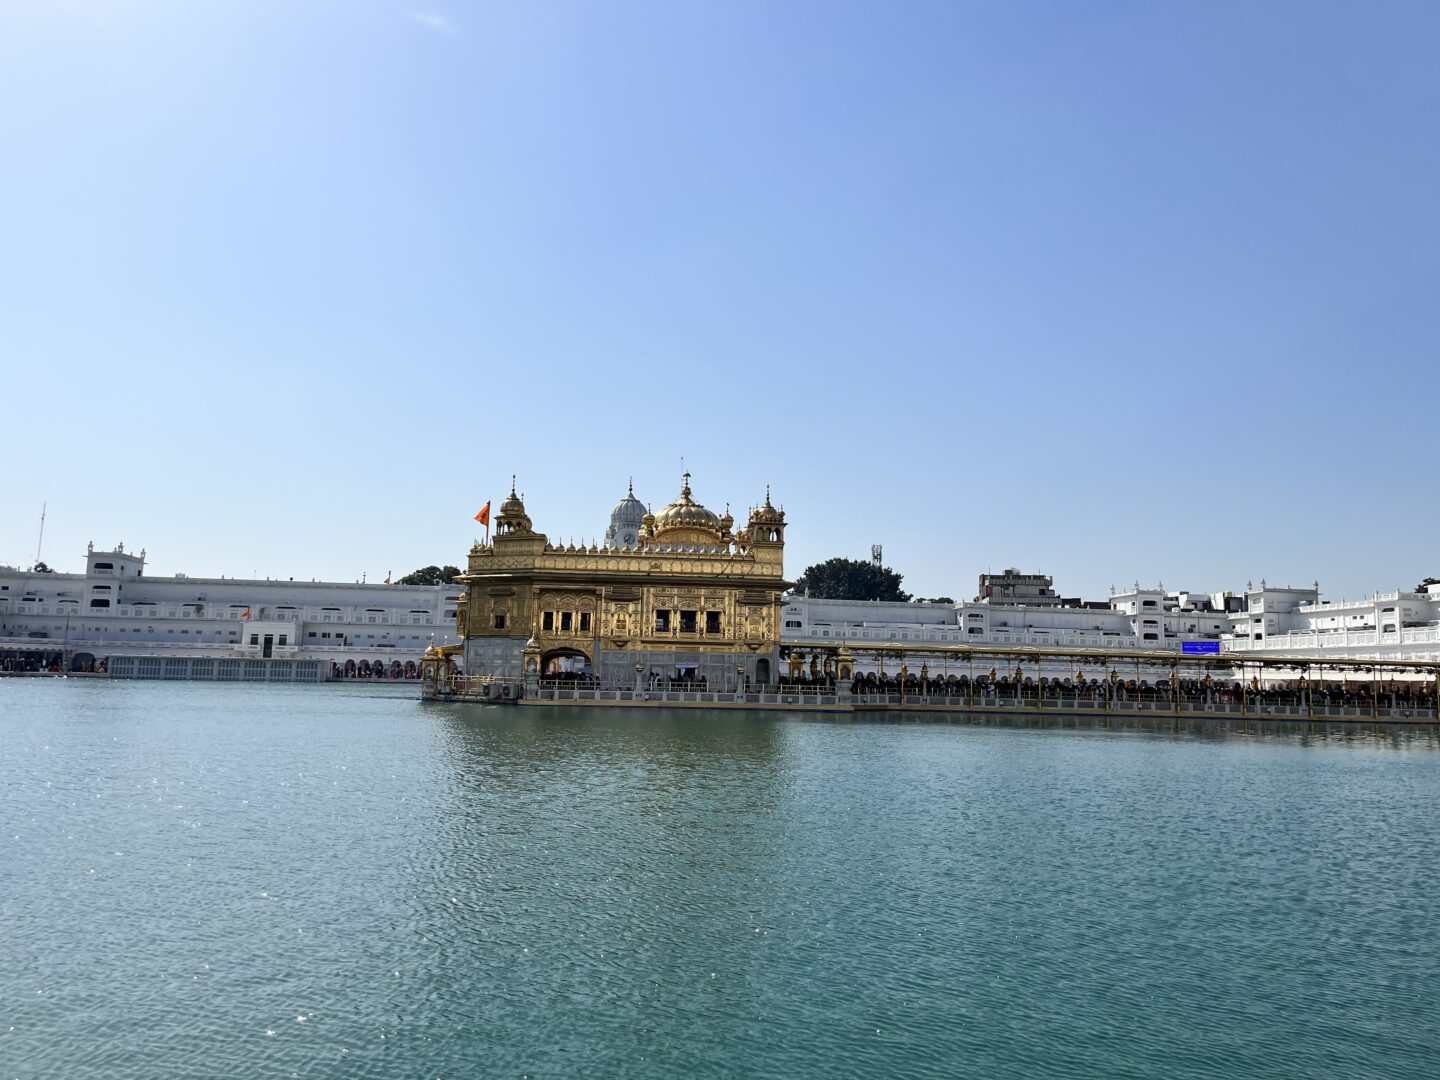 can you visit golden temple during periods